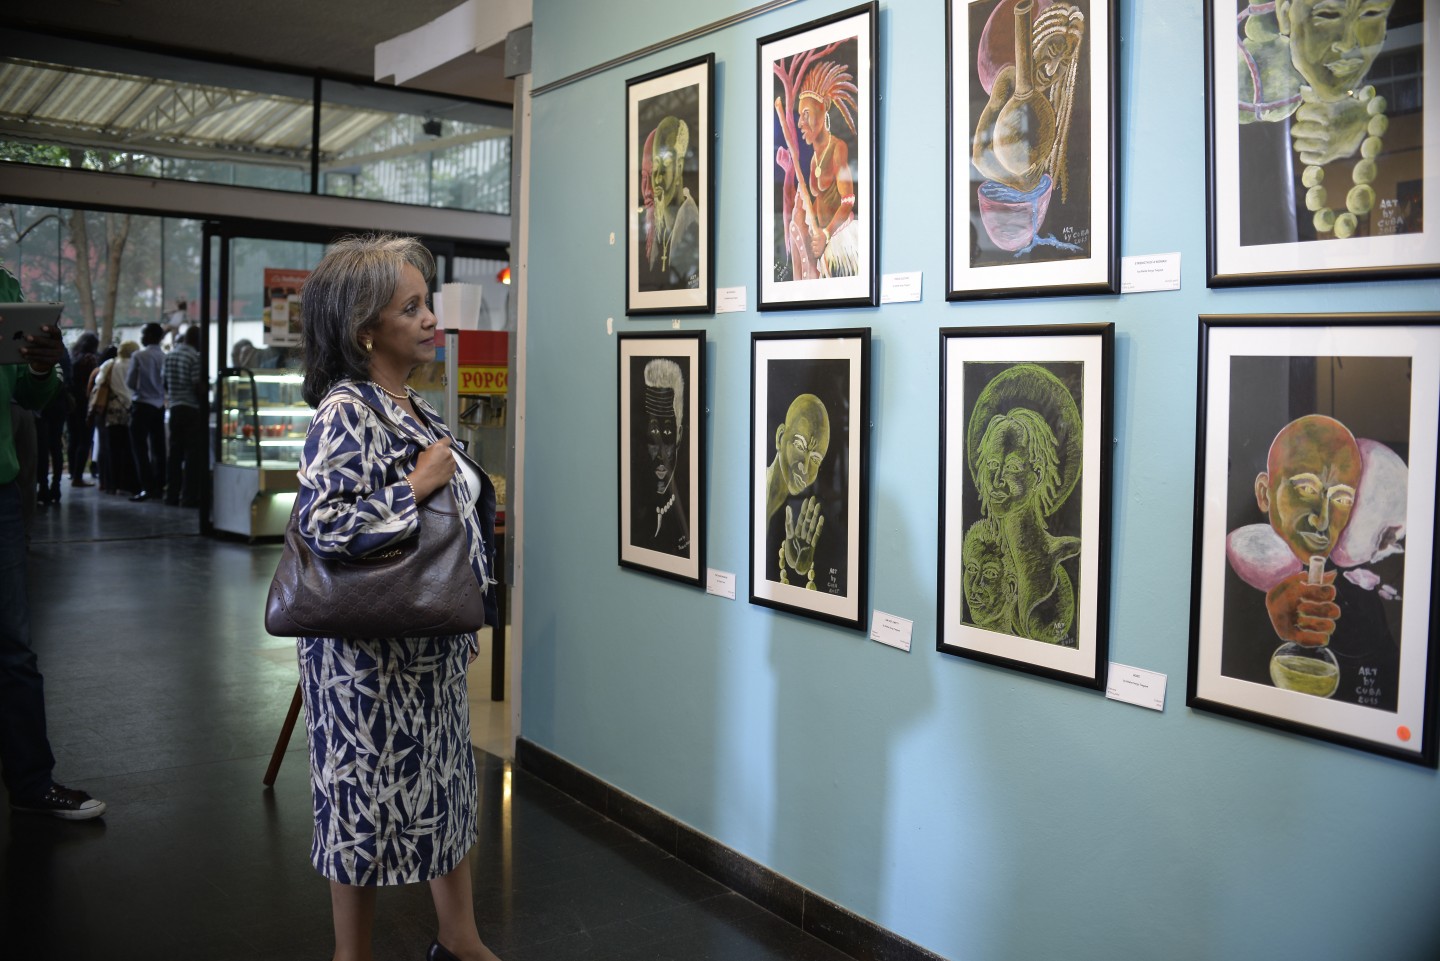 Director-General of the United Nations Office at Nairobi (UNON) Madame Sahle-Work Zewde admiring some of the work by refugee artists Pic/UNHCR